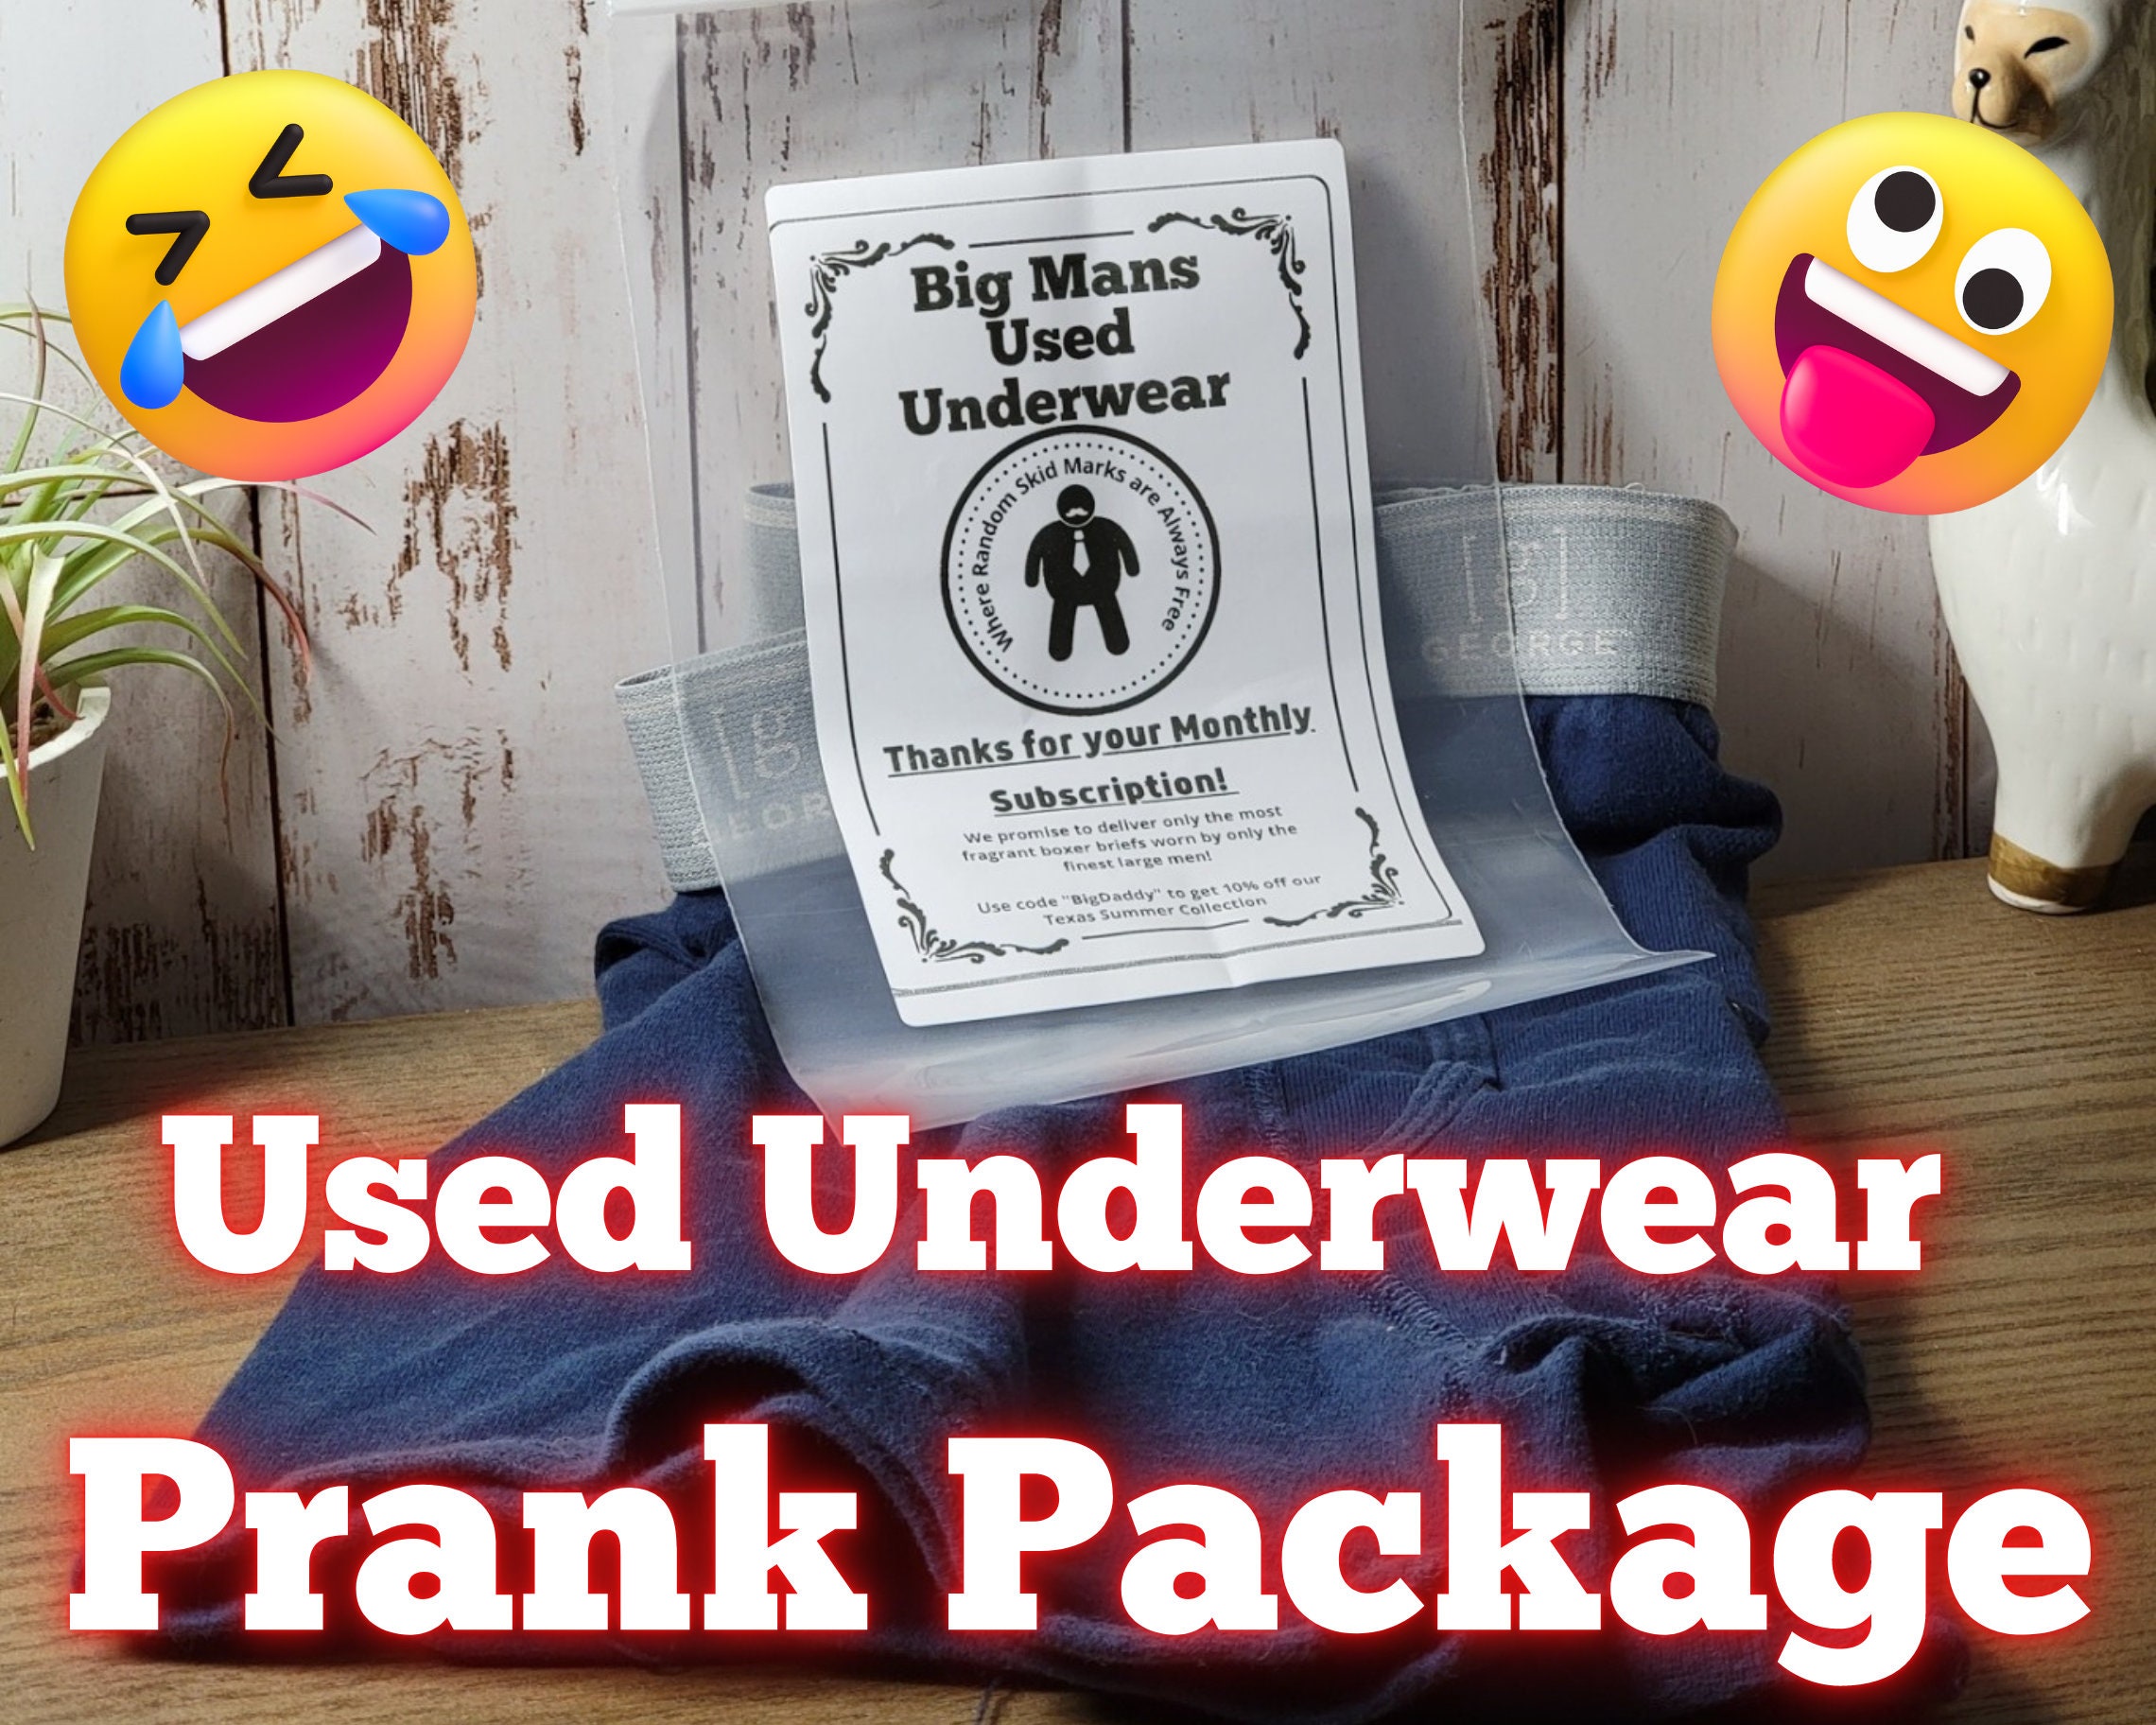 Big Mans's Underwear Prank Package, Clear Envelope With Embarrassing Label,  Contains 1 Pair of Washed/clean, but Used Boxer Briefs. 